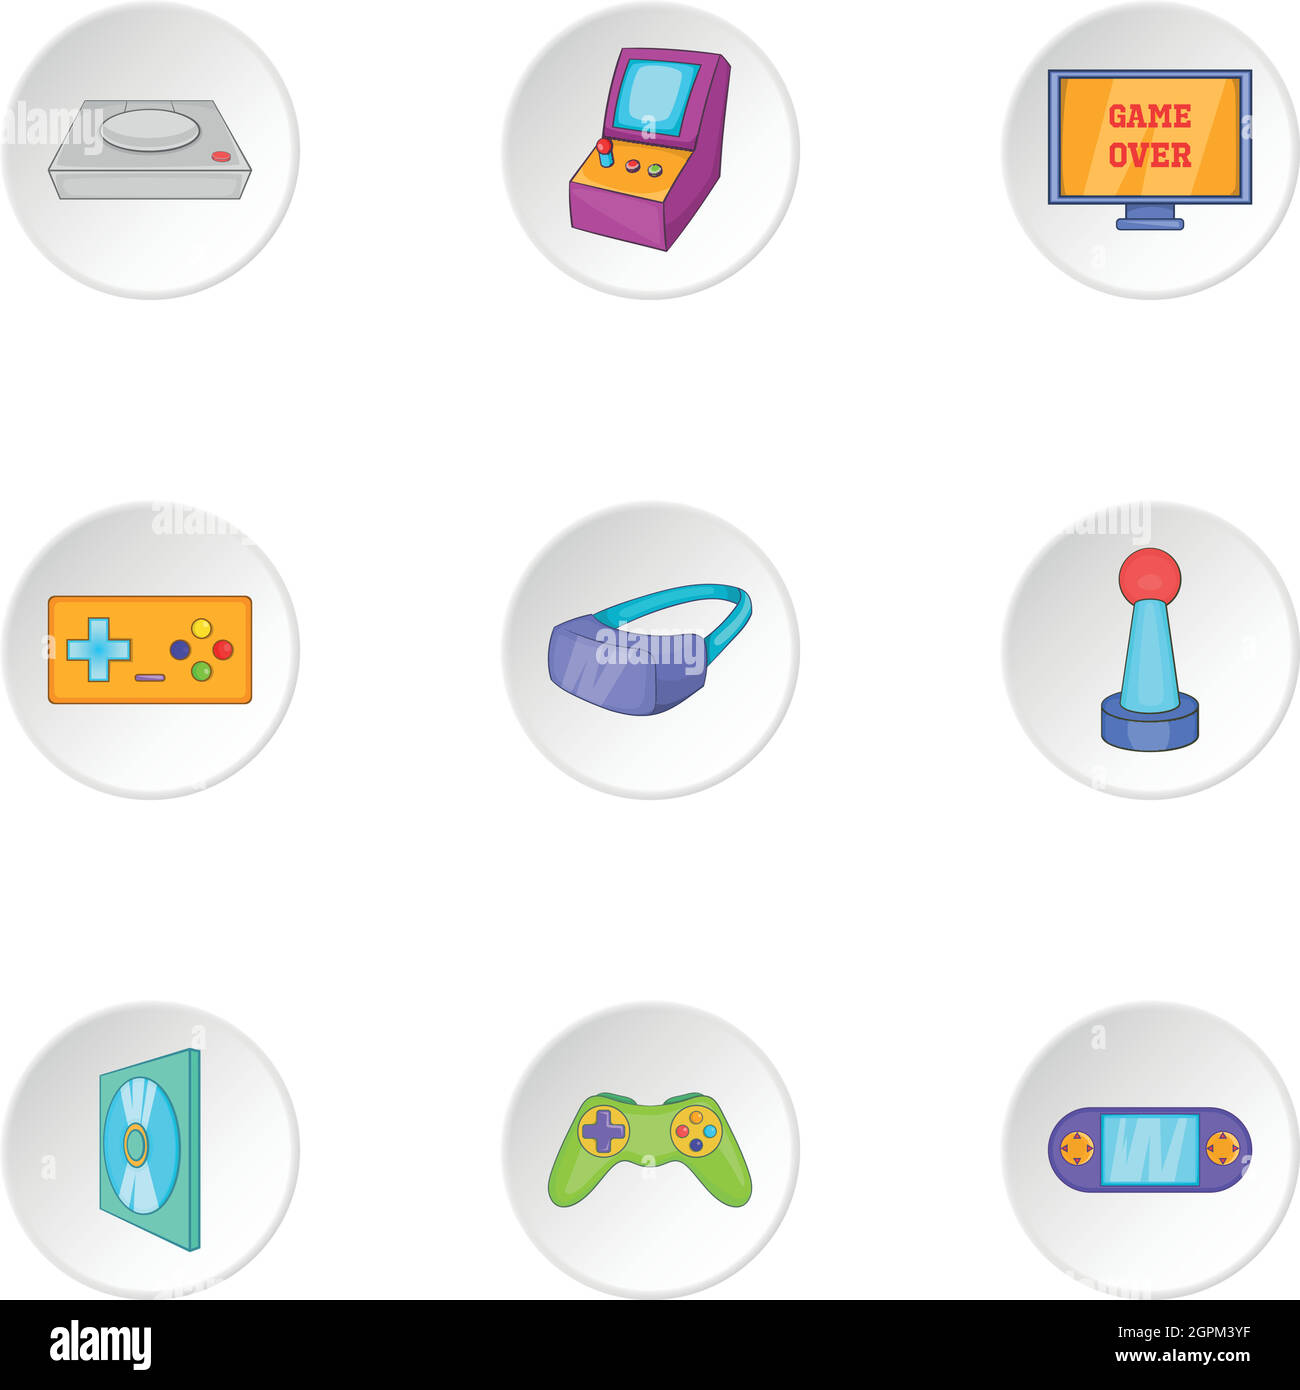 Play console icons set, cartoon style Stock Vector